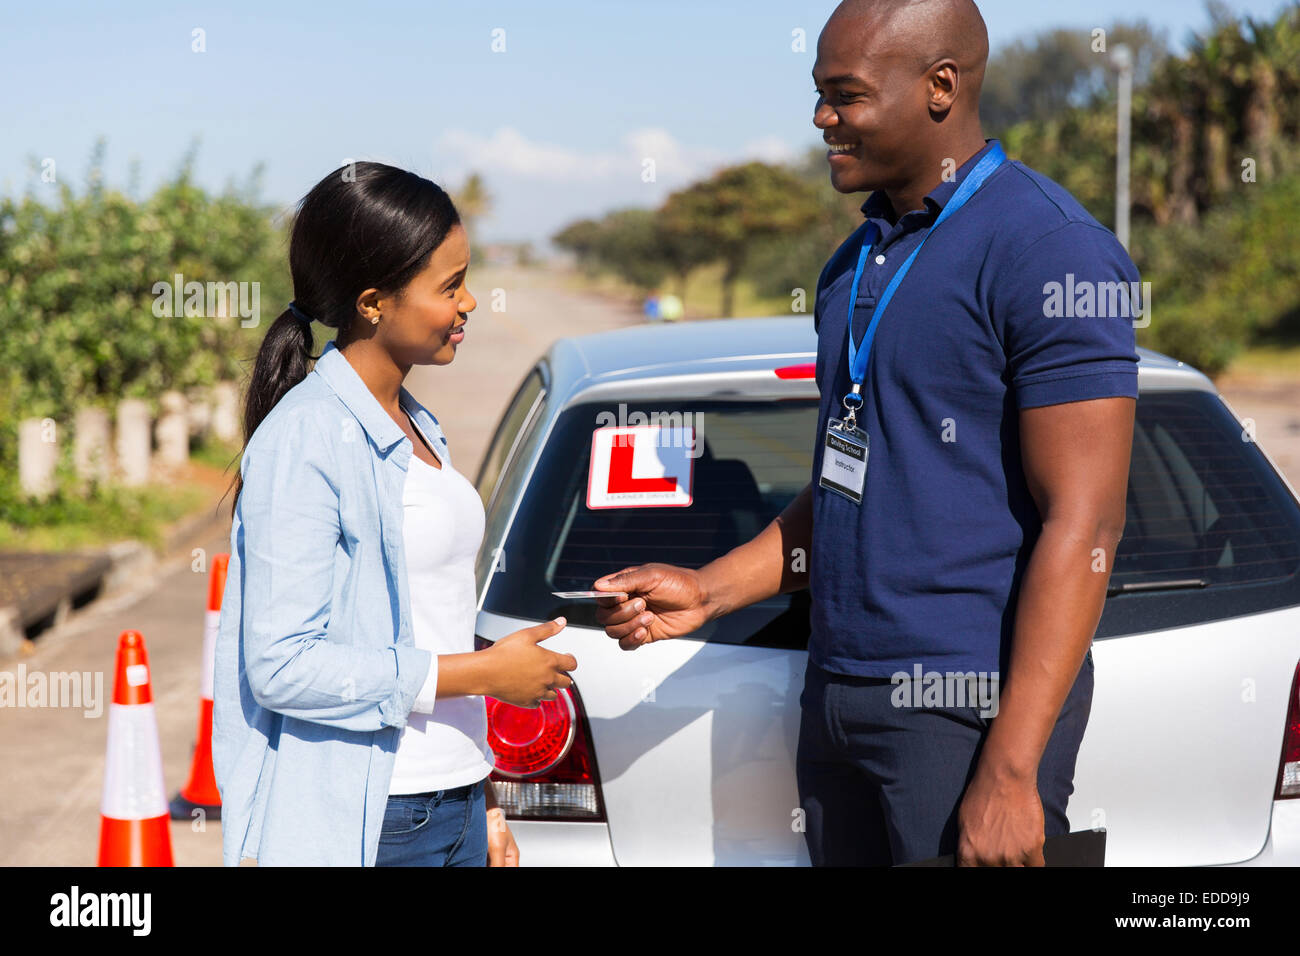 friendly African driving instructor handing driving license to student driver Stock Photo